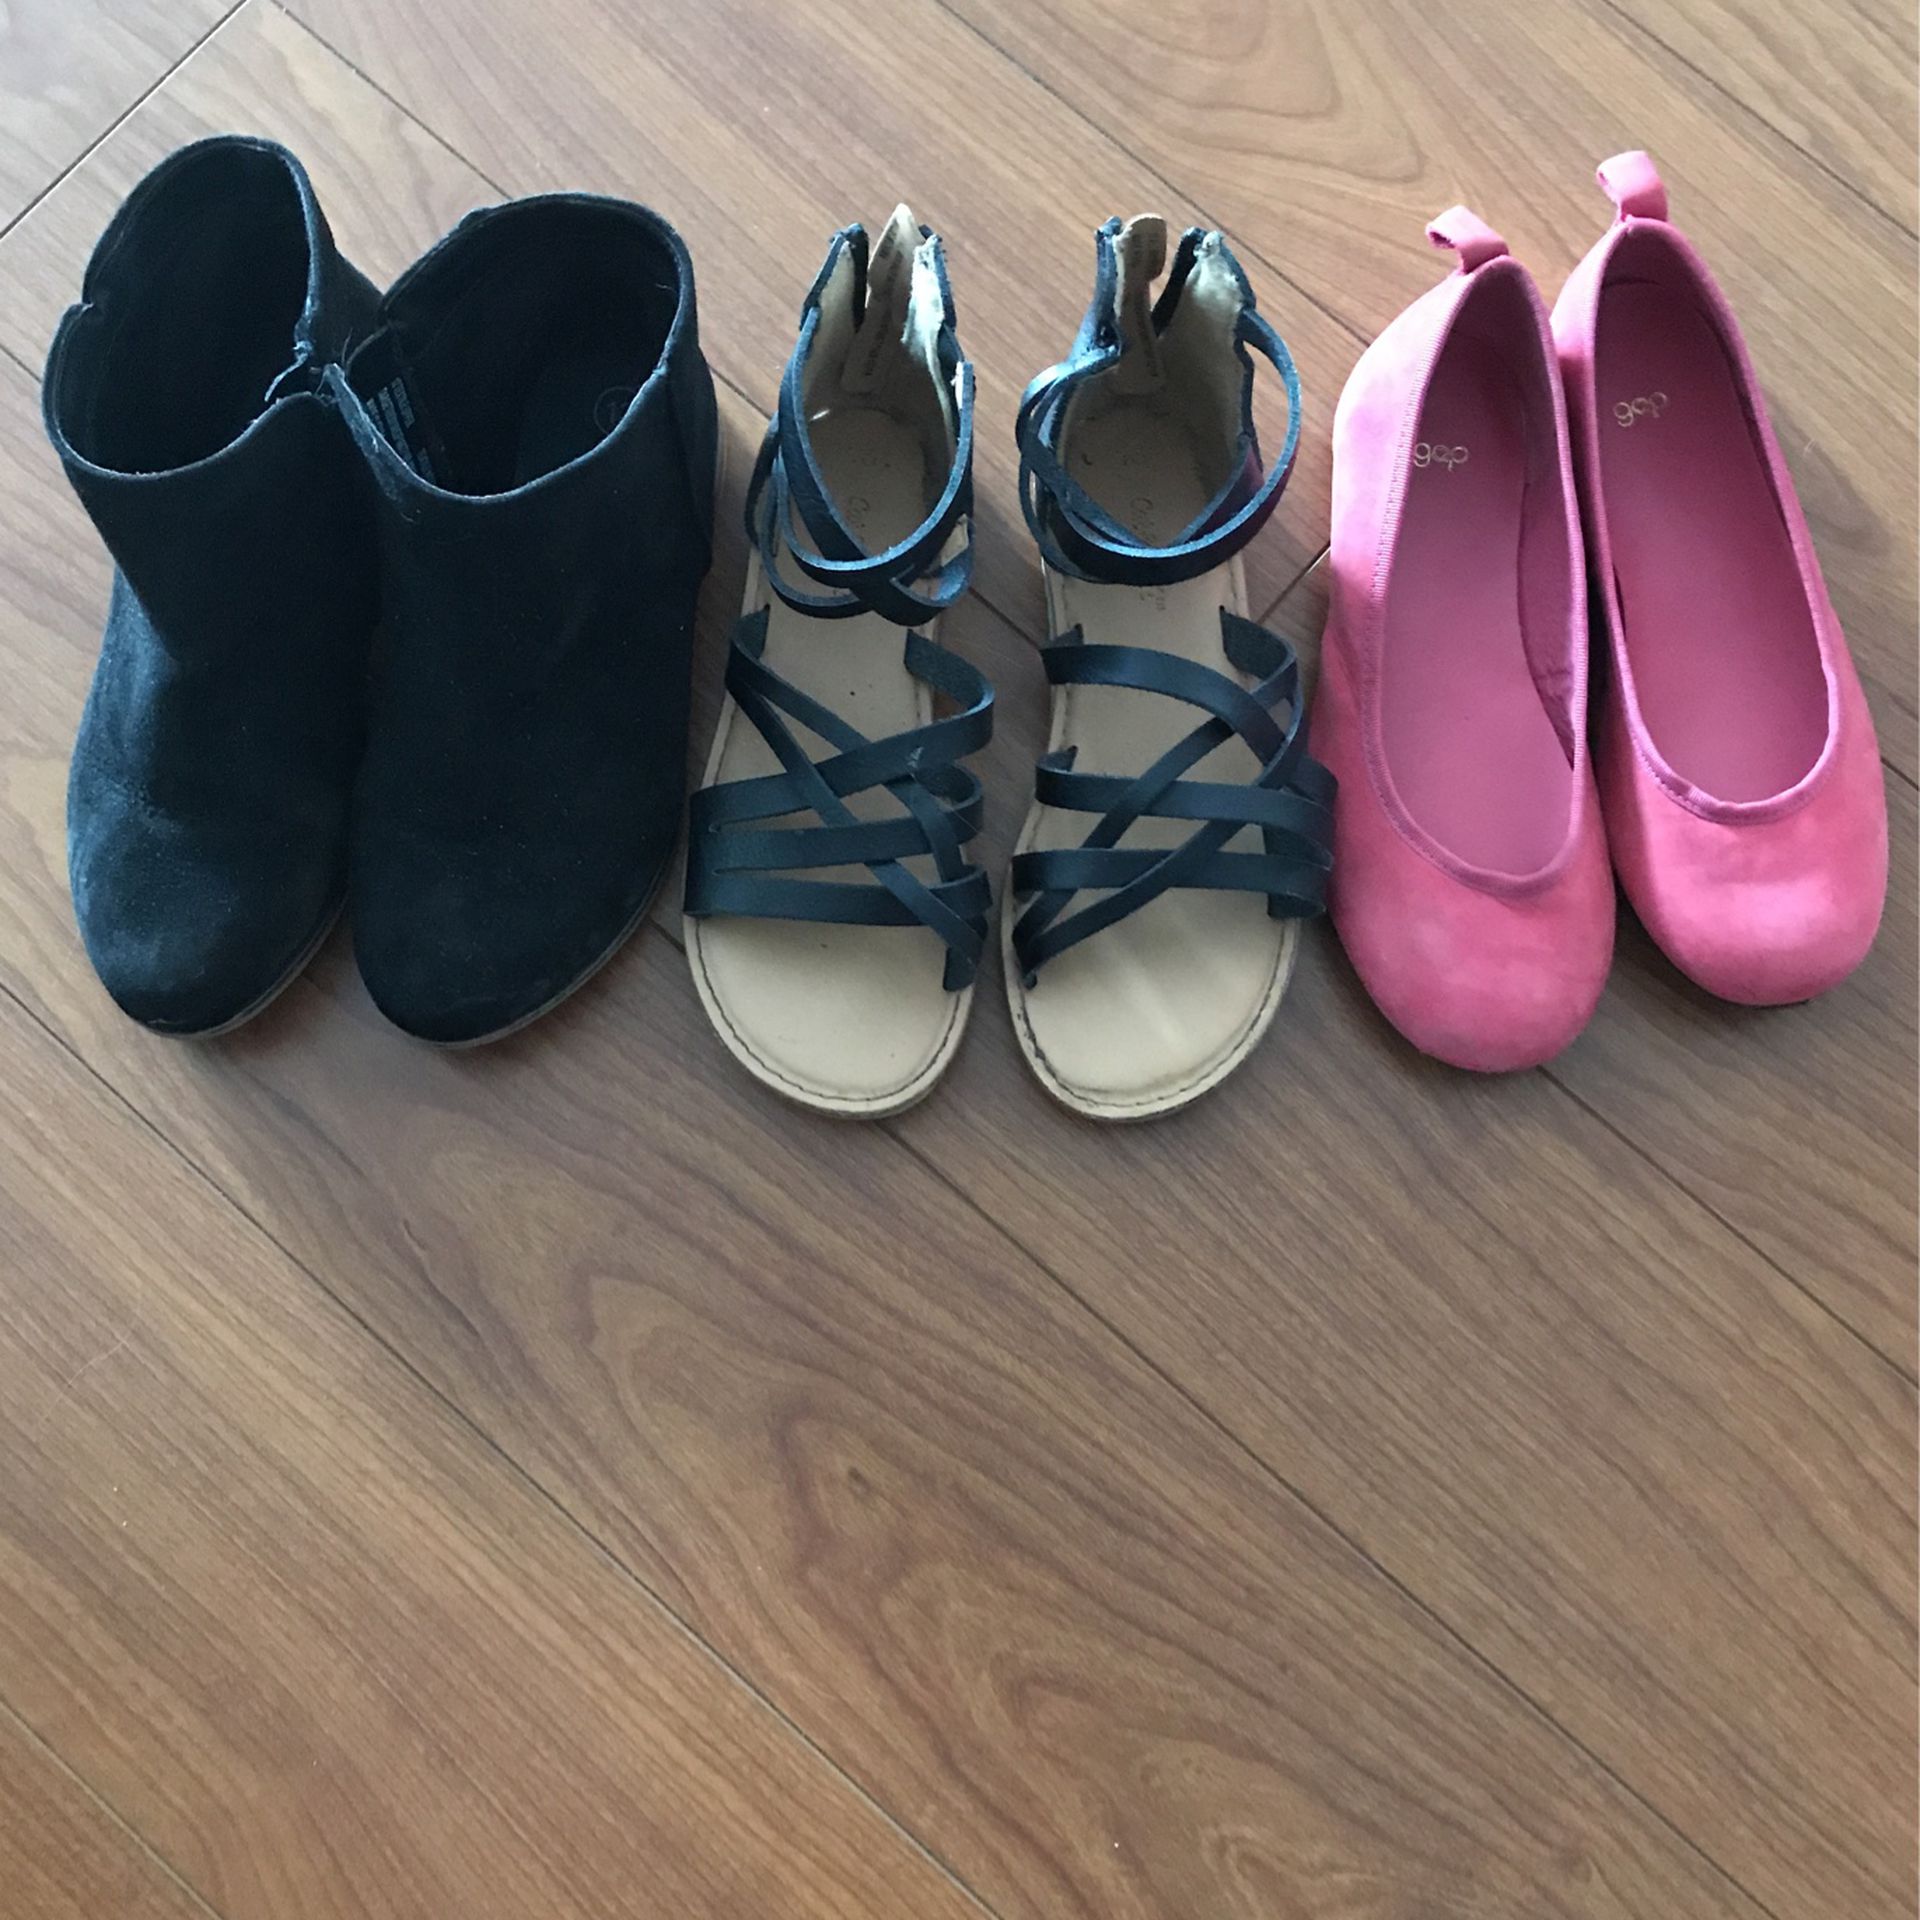 Girl’s shoes (3 Pairs)